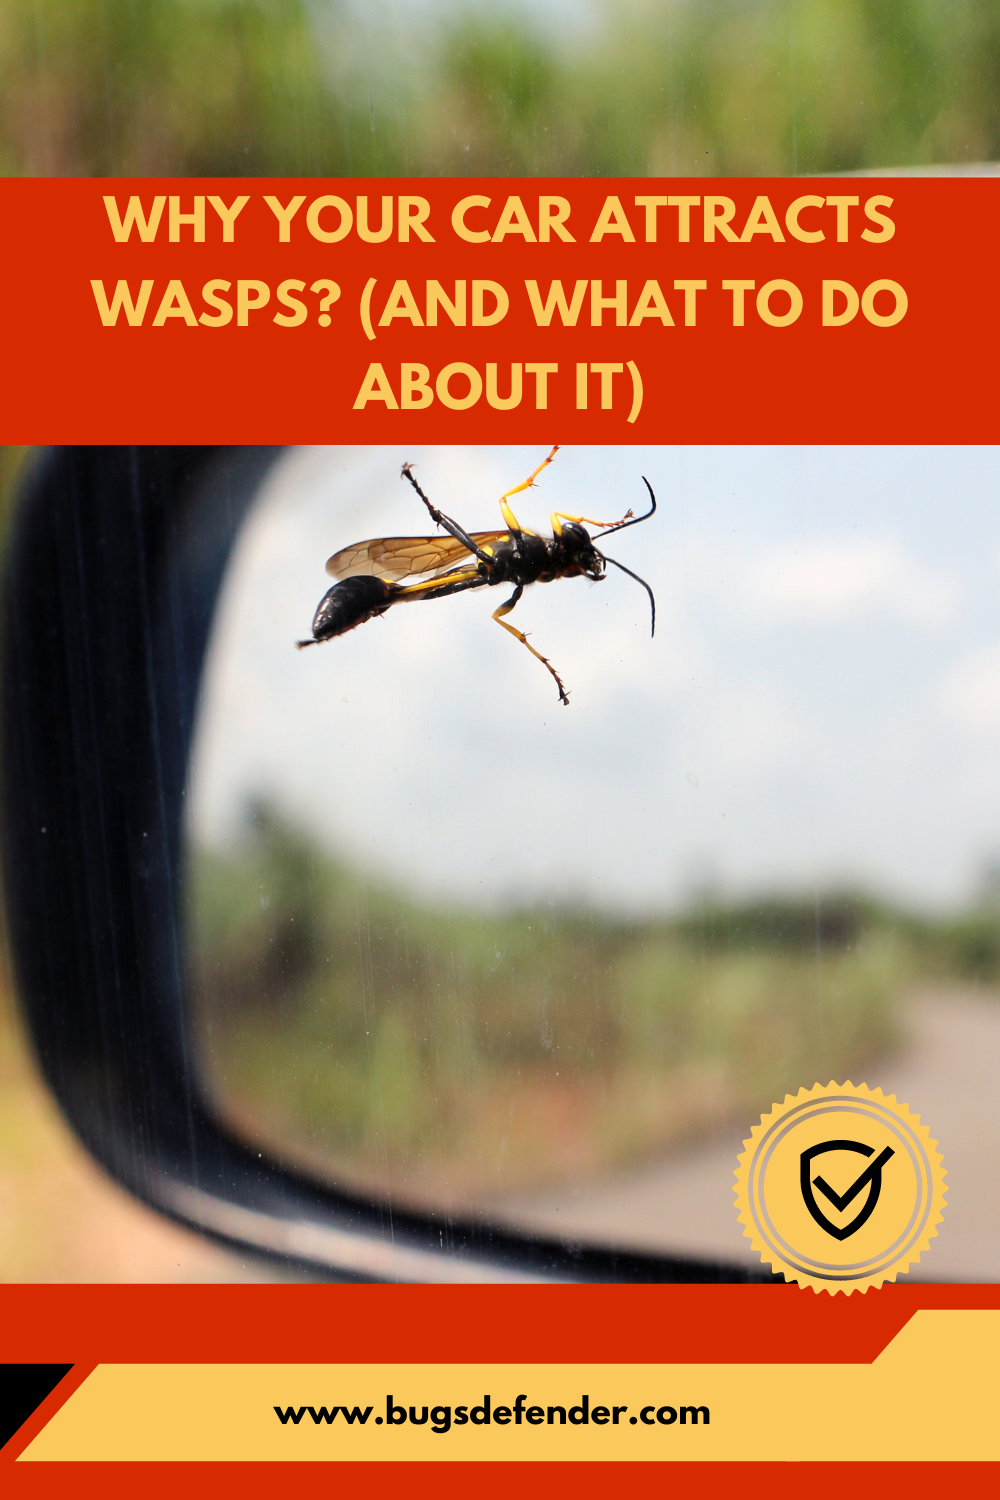 Why Your Car Attracts Wasps pin2